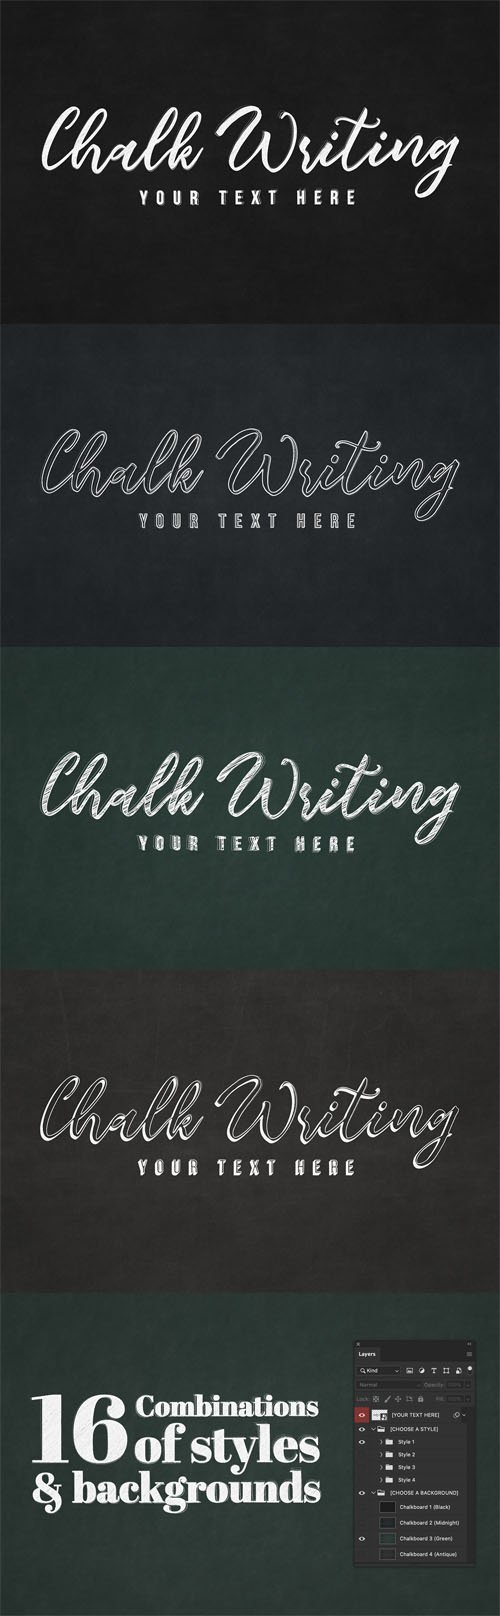 Chalk Writing - 4 Photoshop Text Effects